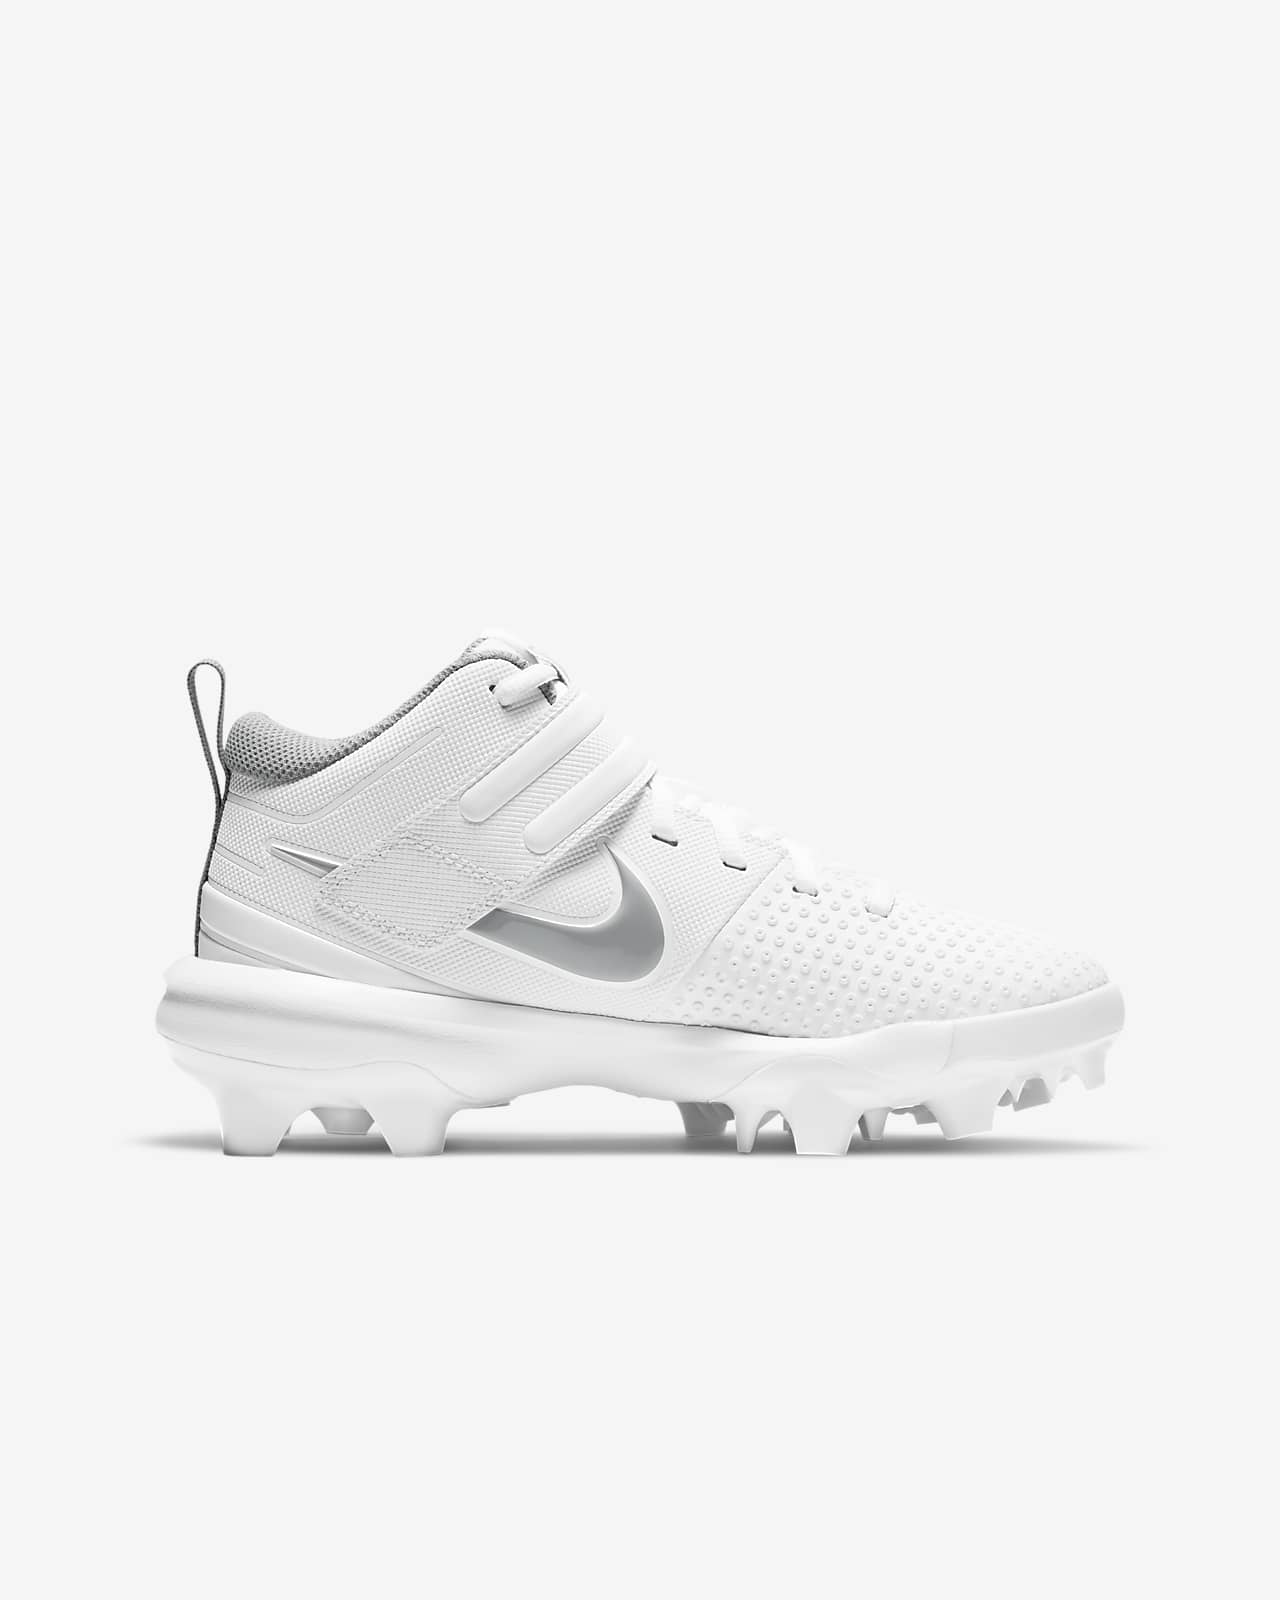 mike trout baseball cleats youth